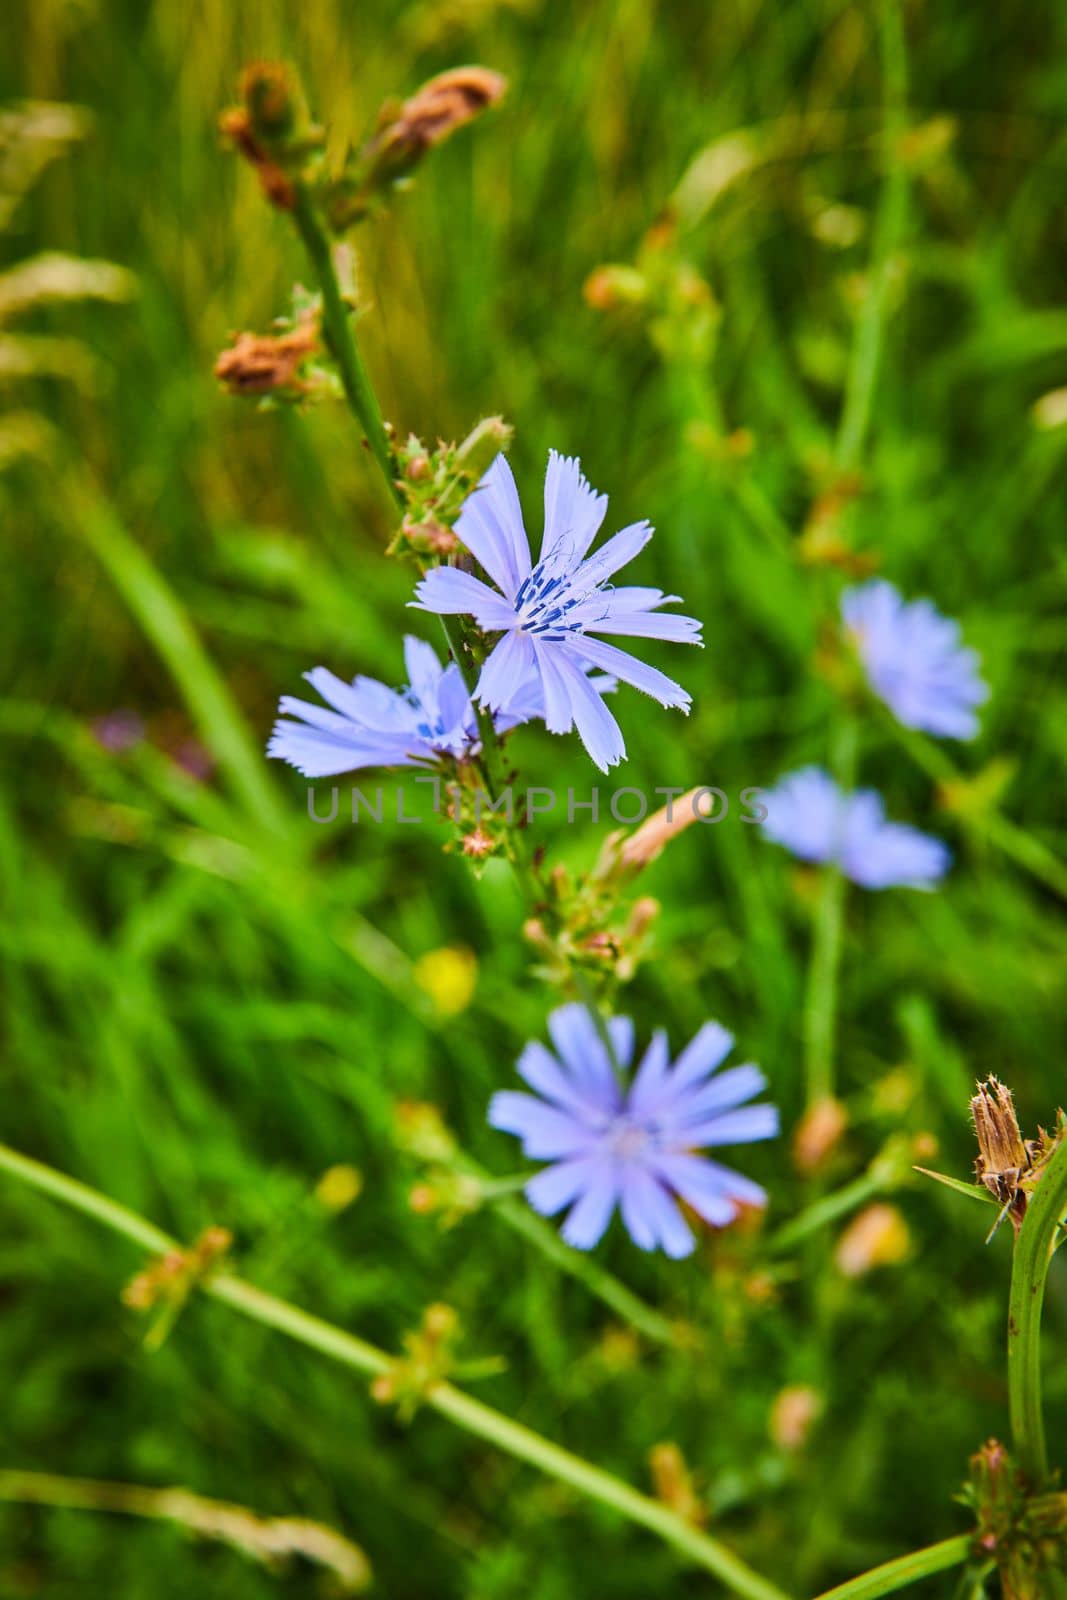 Image of Purple field flowers in detail surrounded by green